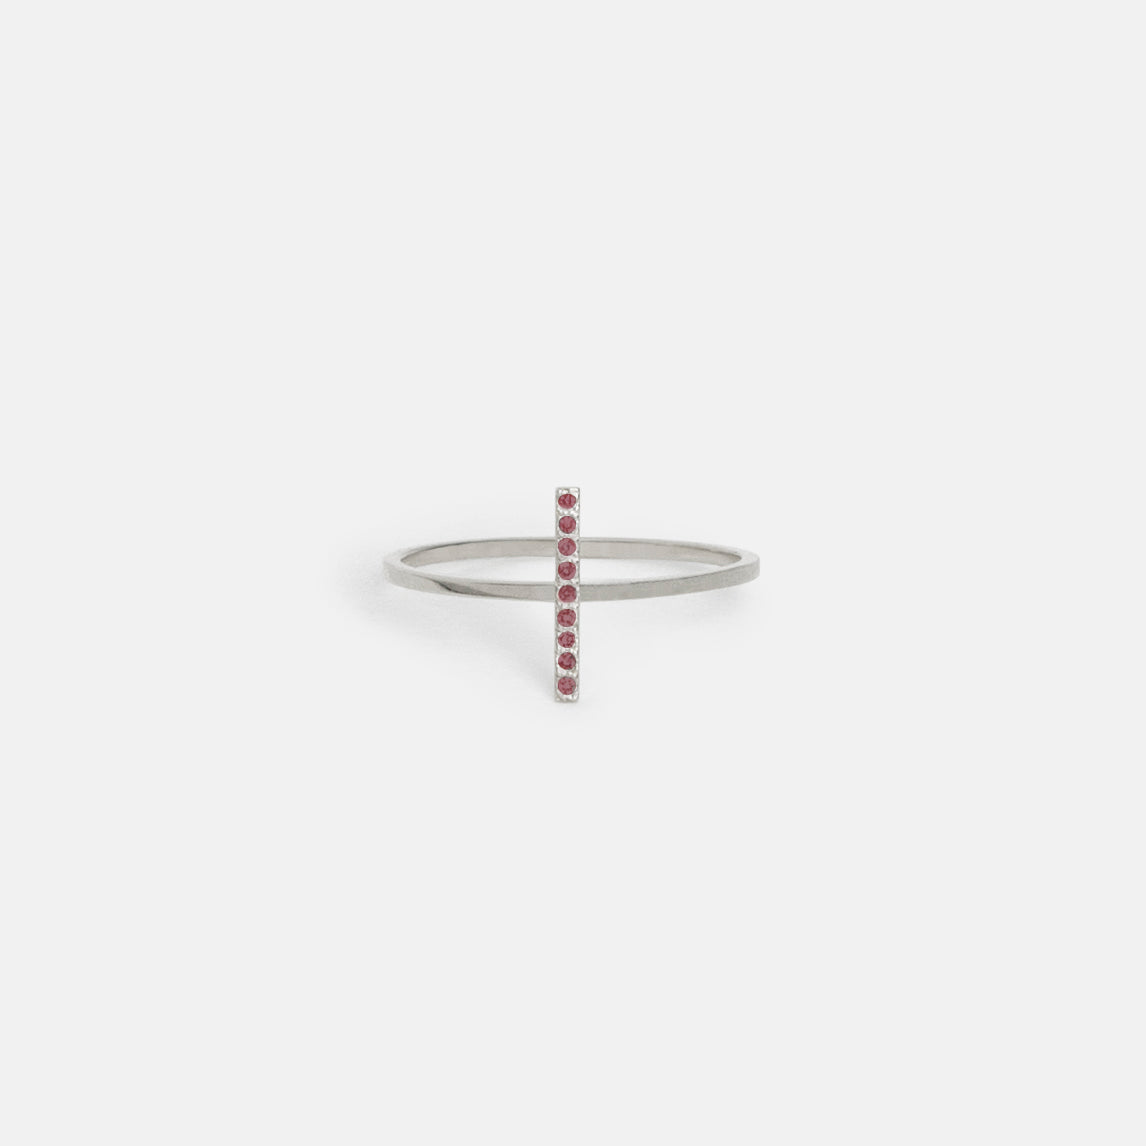 Steva Thin Ring in 14k White Gold set with Rubies by SHW Fine Jewelry